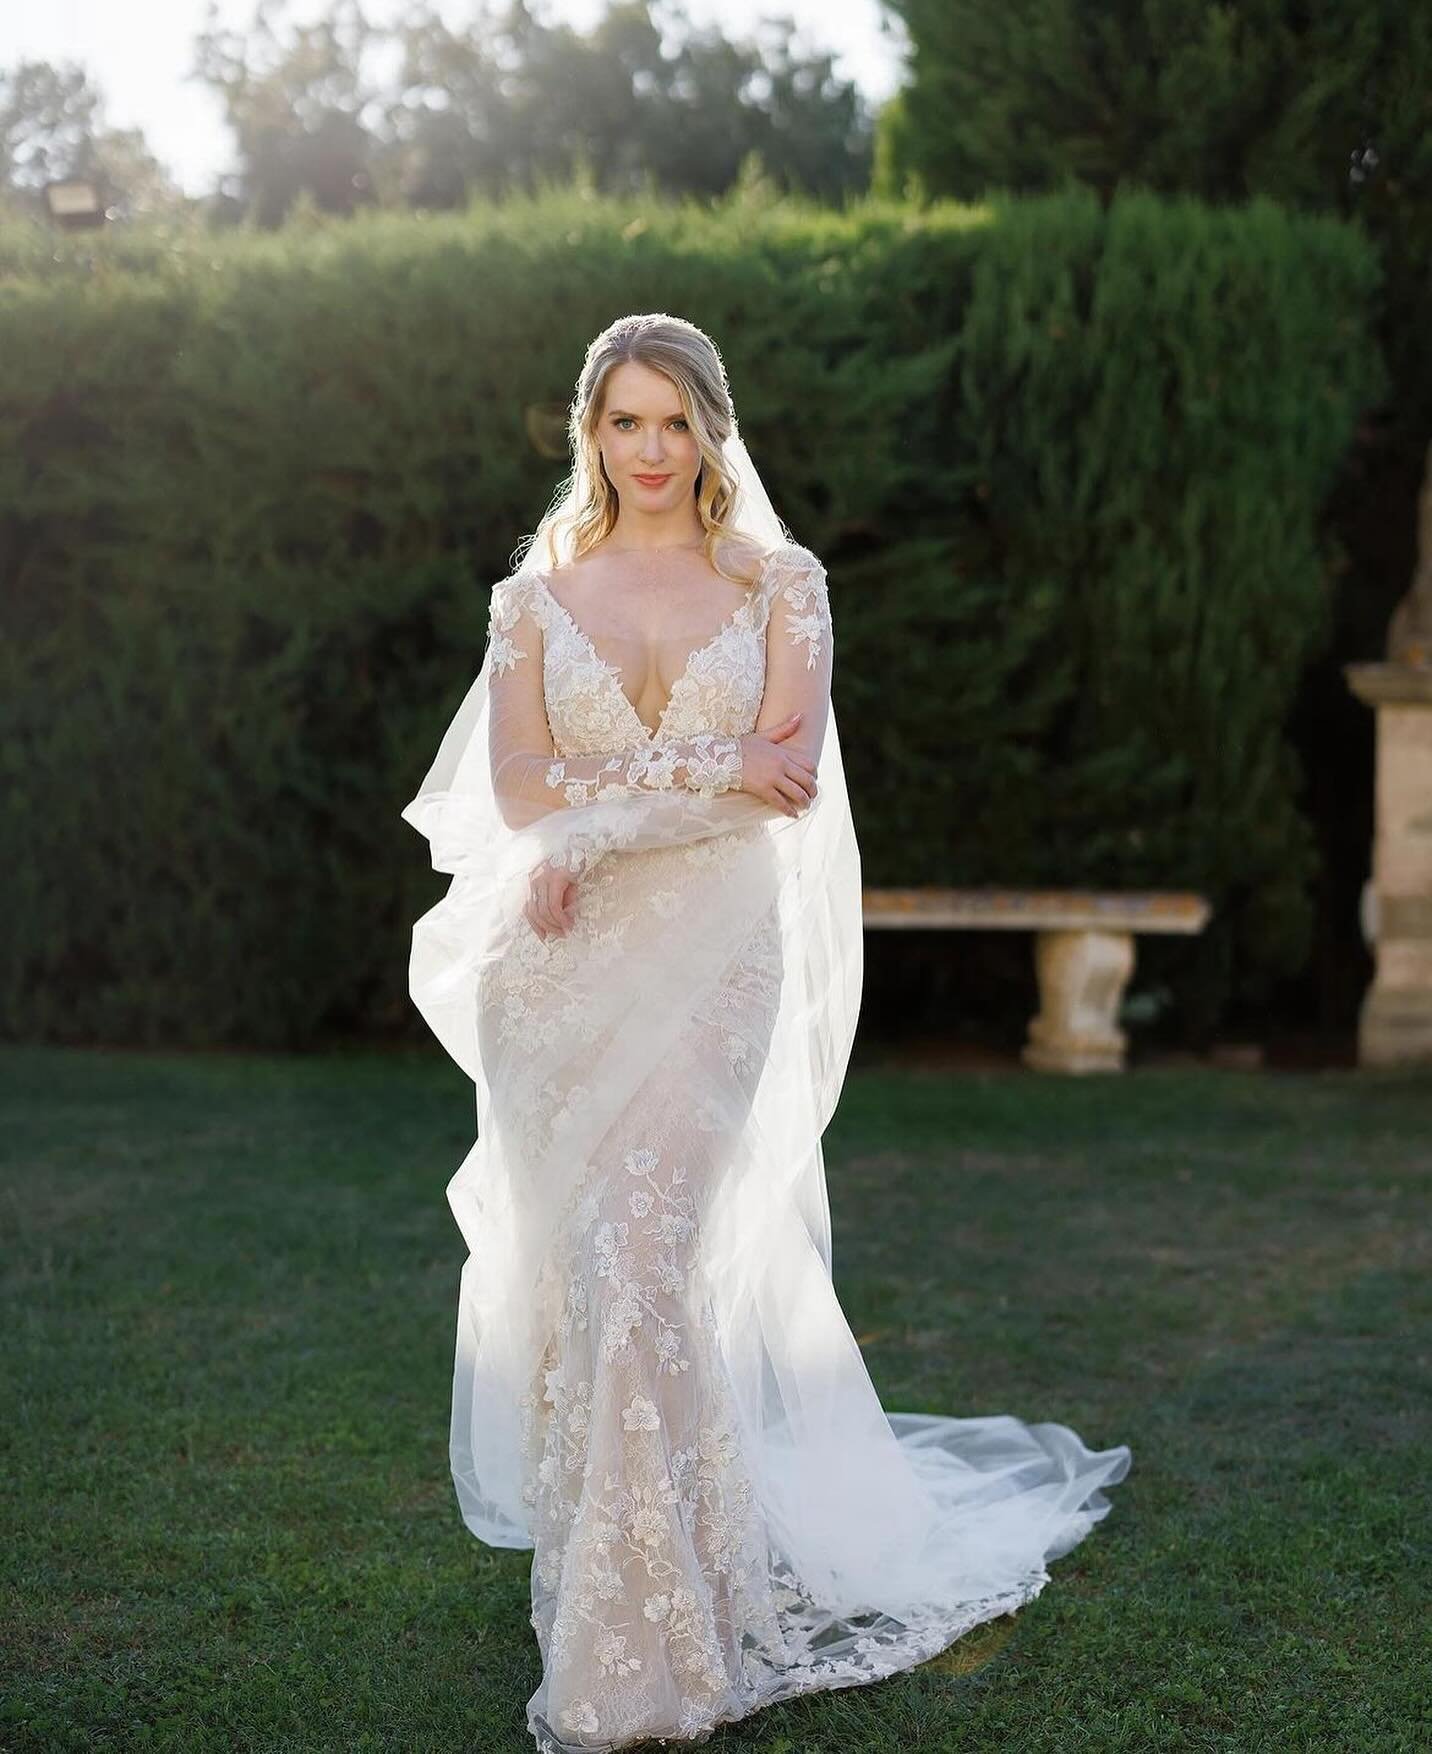 &ldquo;I booked Samantha for my September 2023 wedding in Tuscany &amp; she was one of my favorite choices I made that day. Samantha &amp; her team went above and beyond to make me, my family &amp; bridesmaids look &amp; feel our best on the wedding 